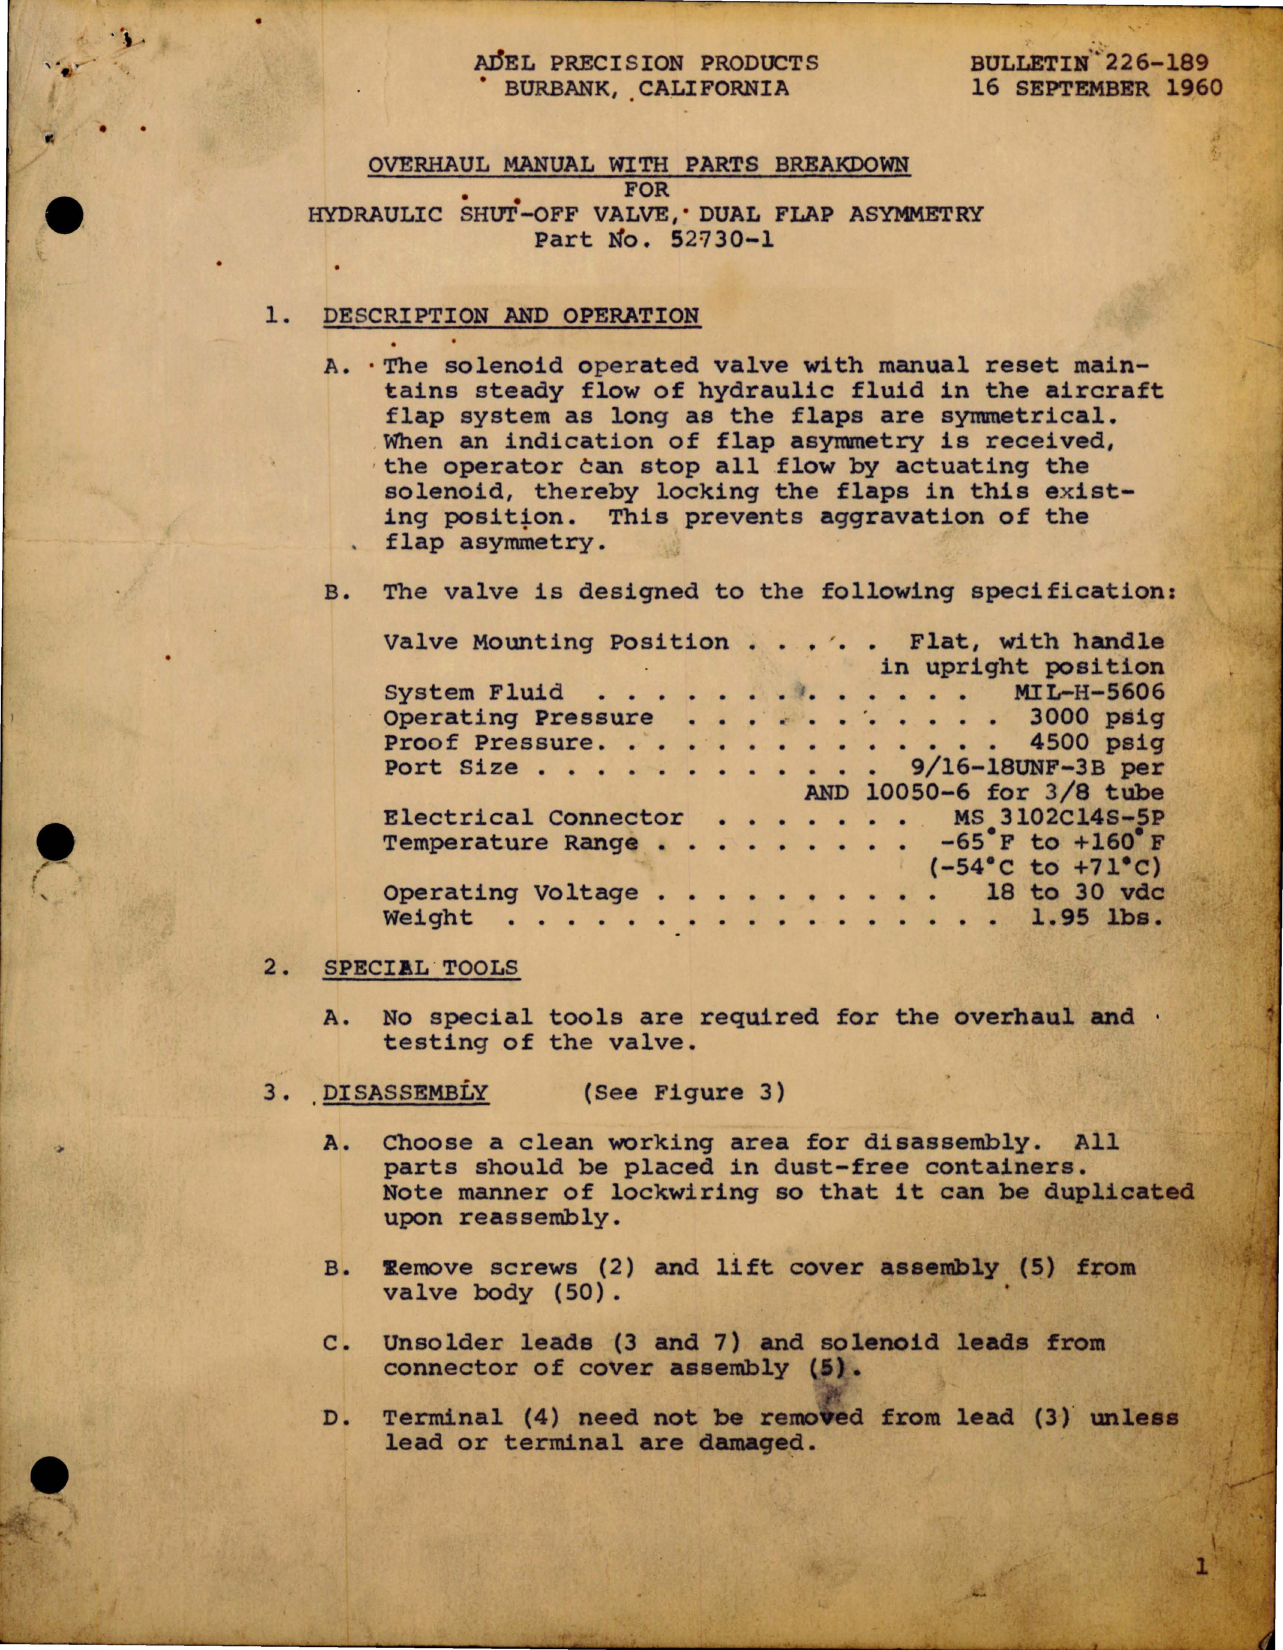 Sample page 1 from AirCorps Library document: Overhaul Manual with Parts Breakdown for Hydraulic Shut Off Valve Dual Flap Asymmetry - Part 52730-1